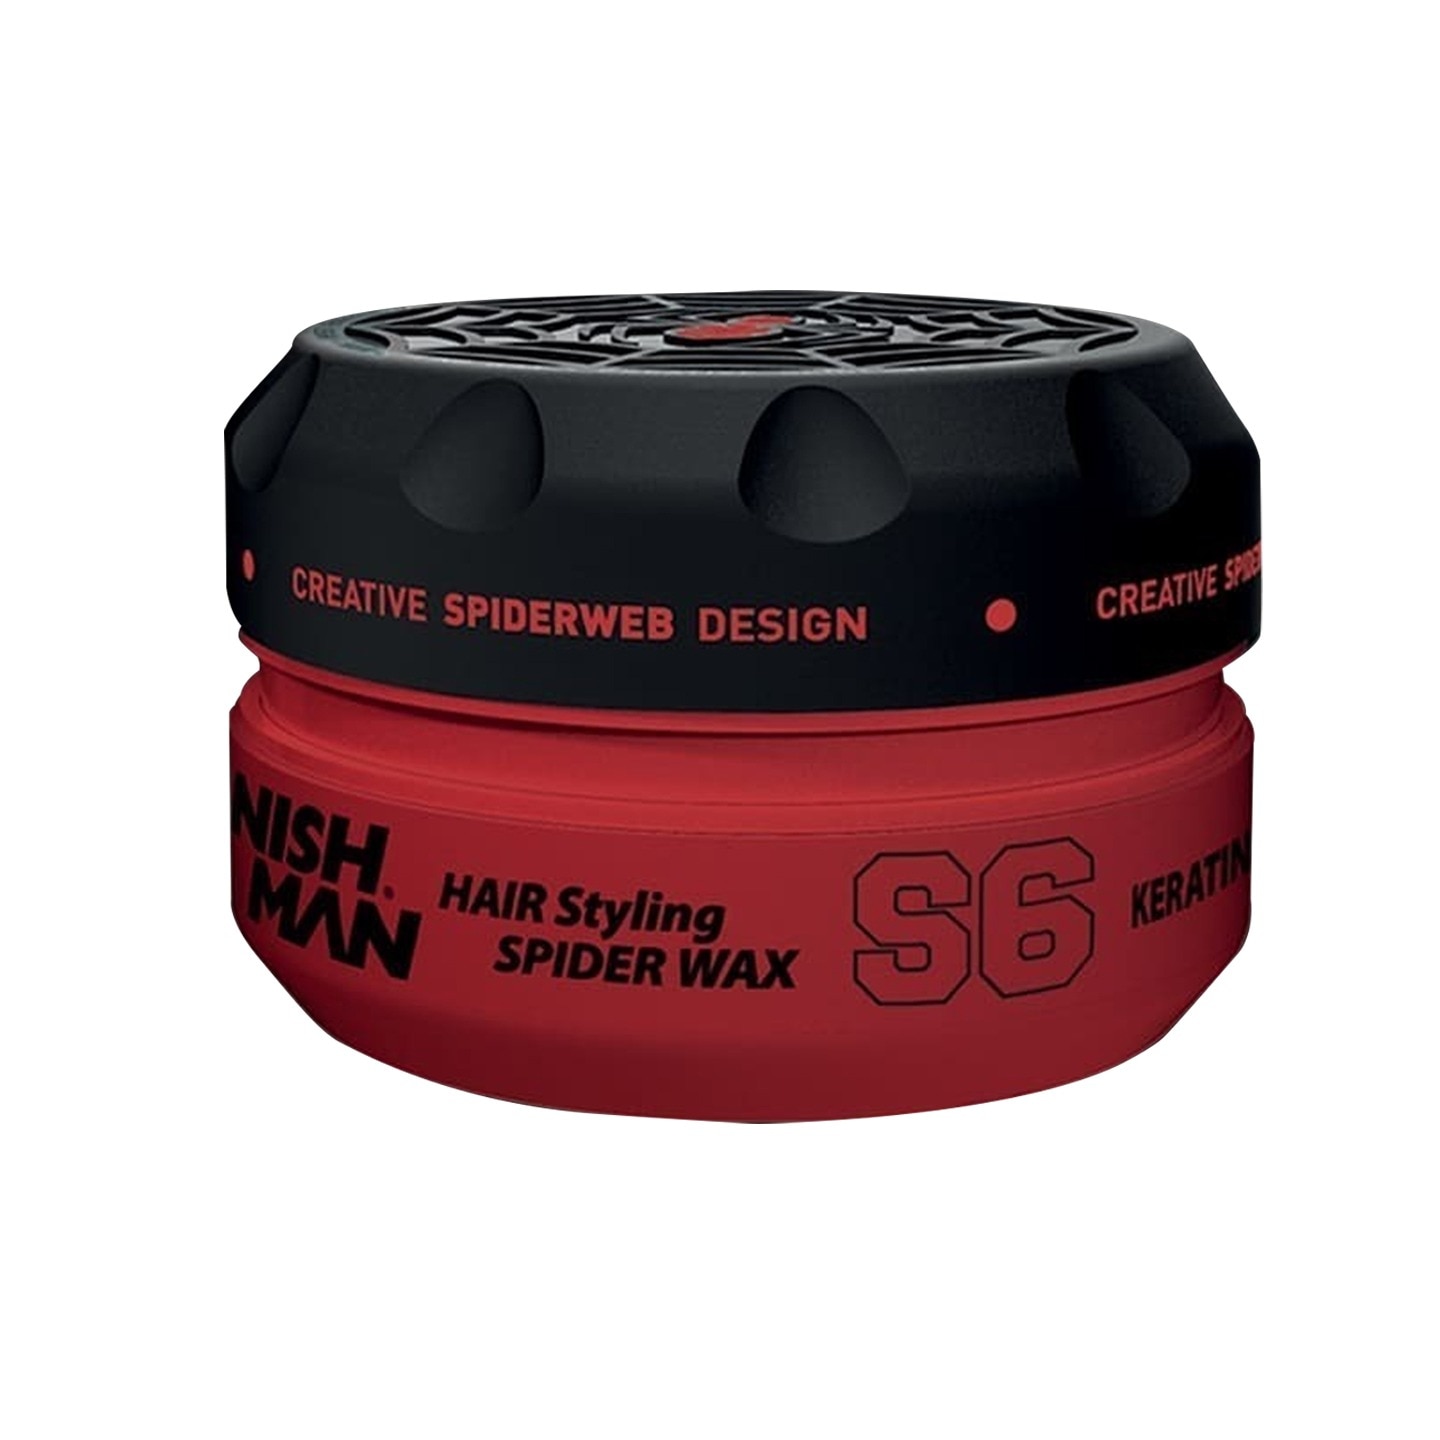  nishman Hair Styling Series (S3 BlueWeb Spider Wax, 150ml) :  Beauty & Personal Care